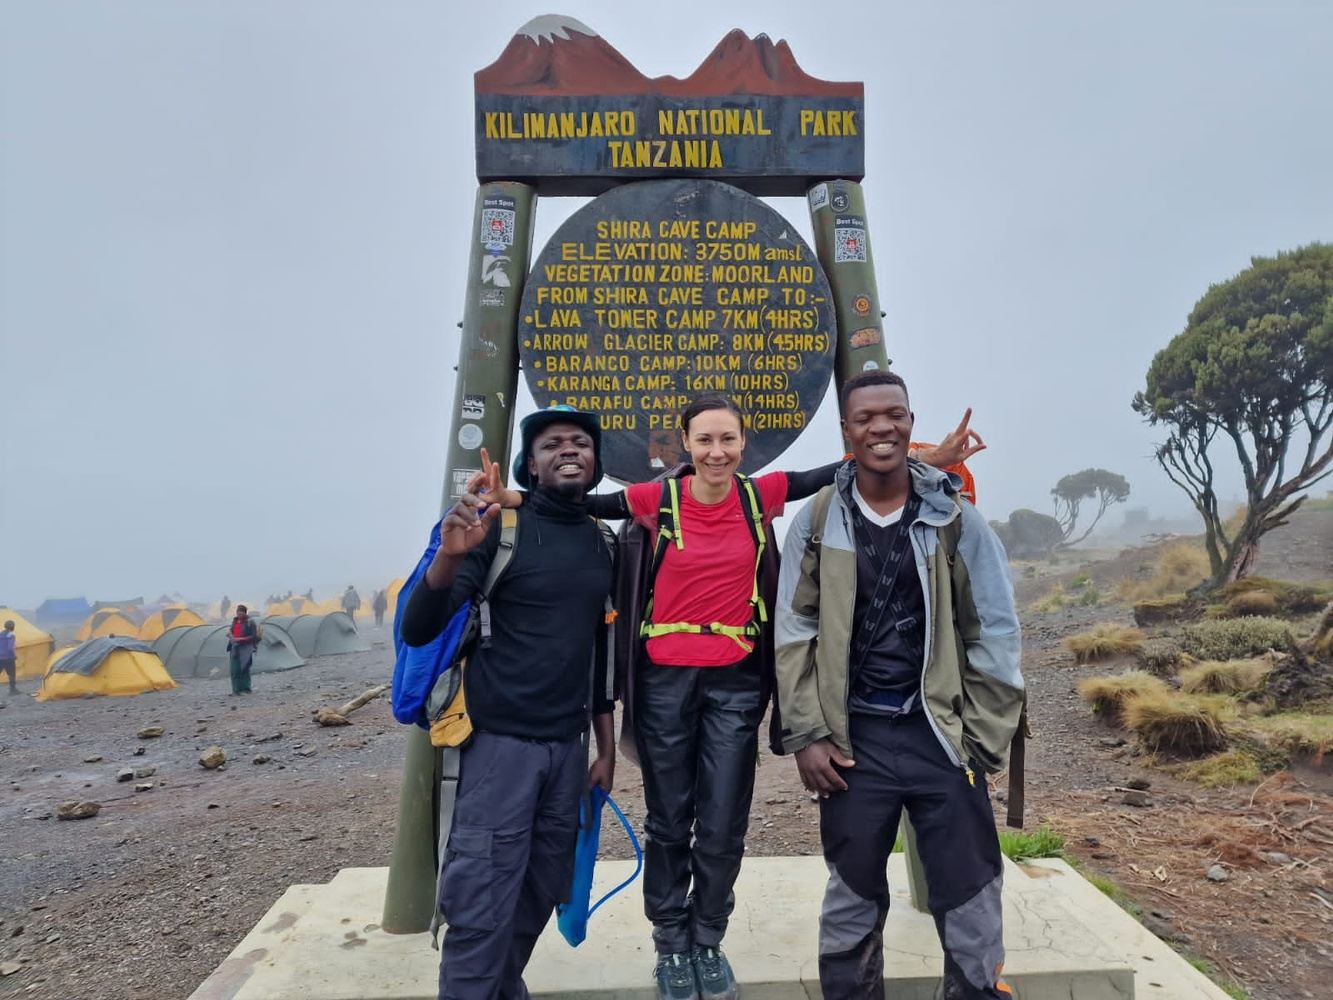 THE BEST 6 DAYS KILIMANJARO CLIMBING VIA MACHAME ROUTE FOR 2023- 2025